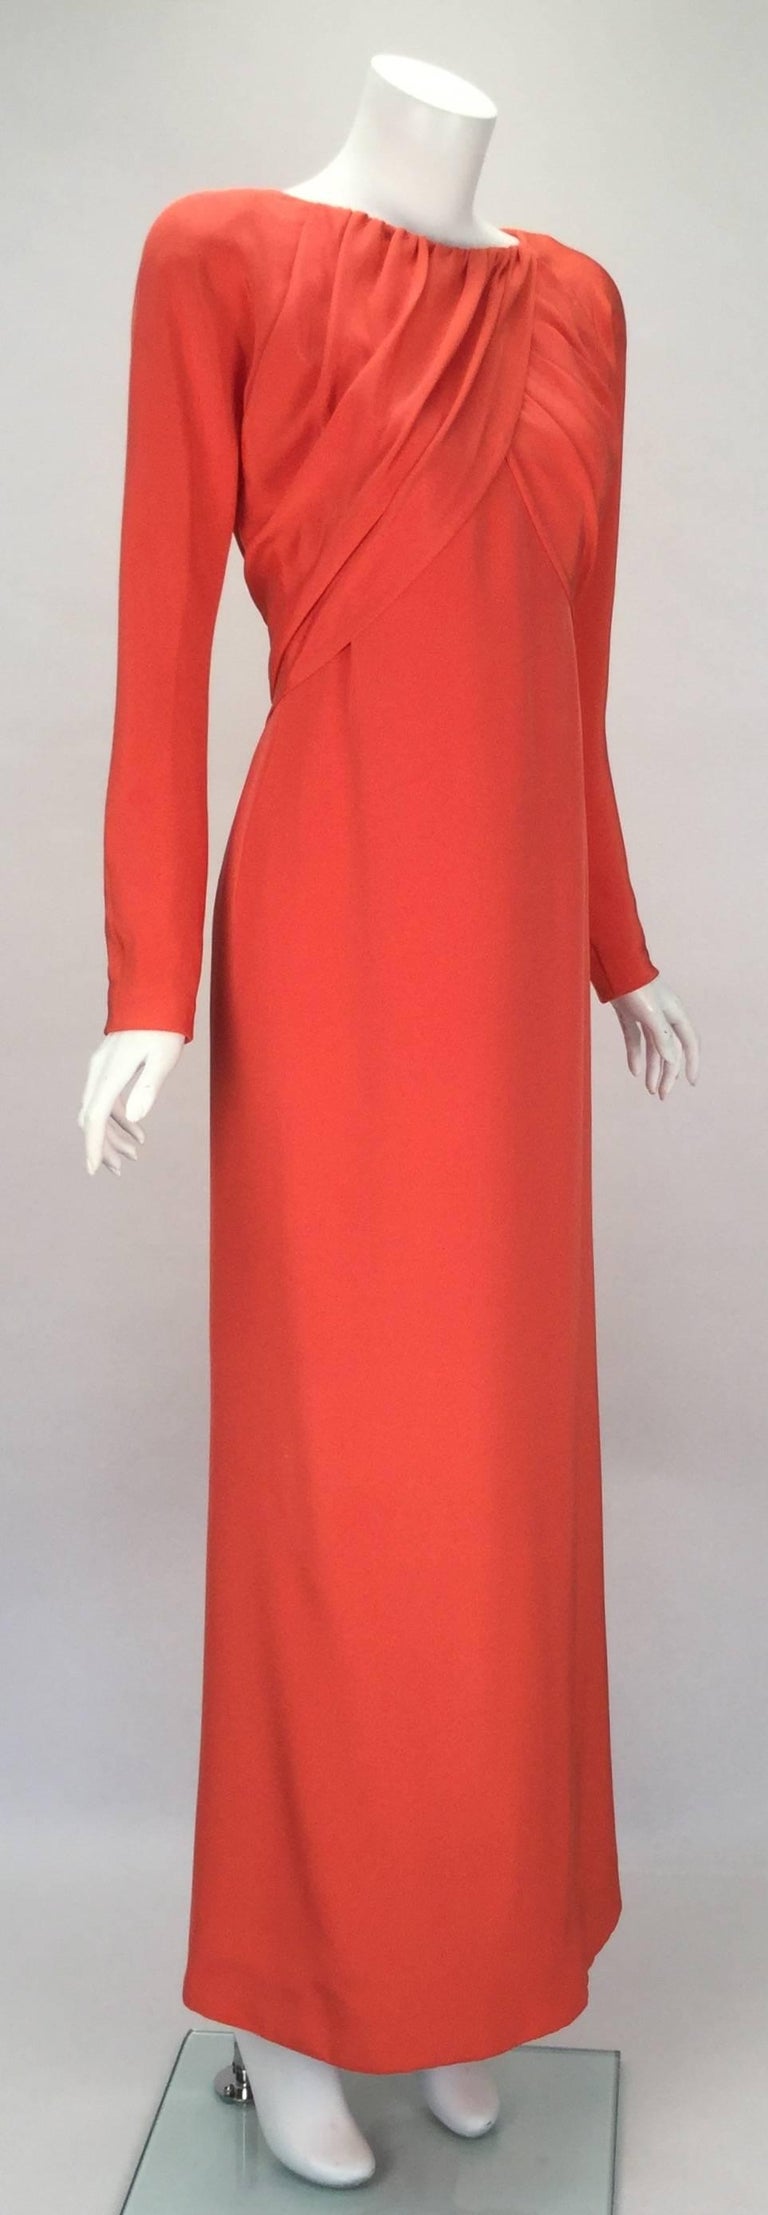 Halston Red Silk Long Sleeve Evening Dress, 1970s   In Good Condition For Sale In Houston, TX